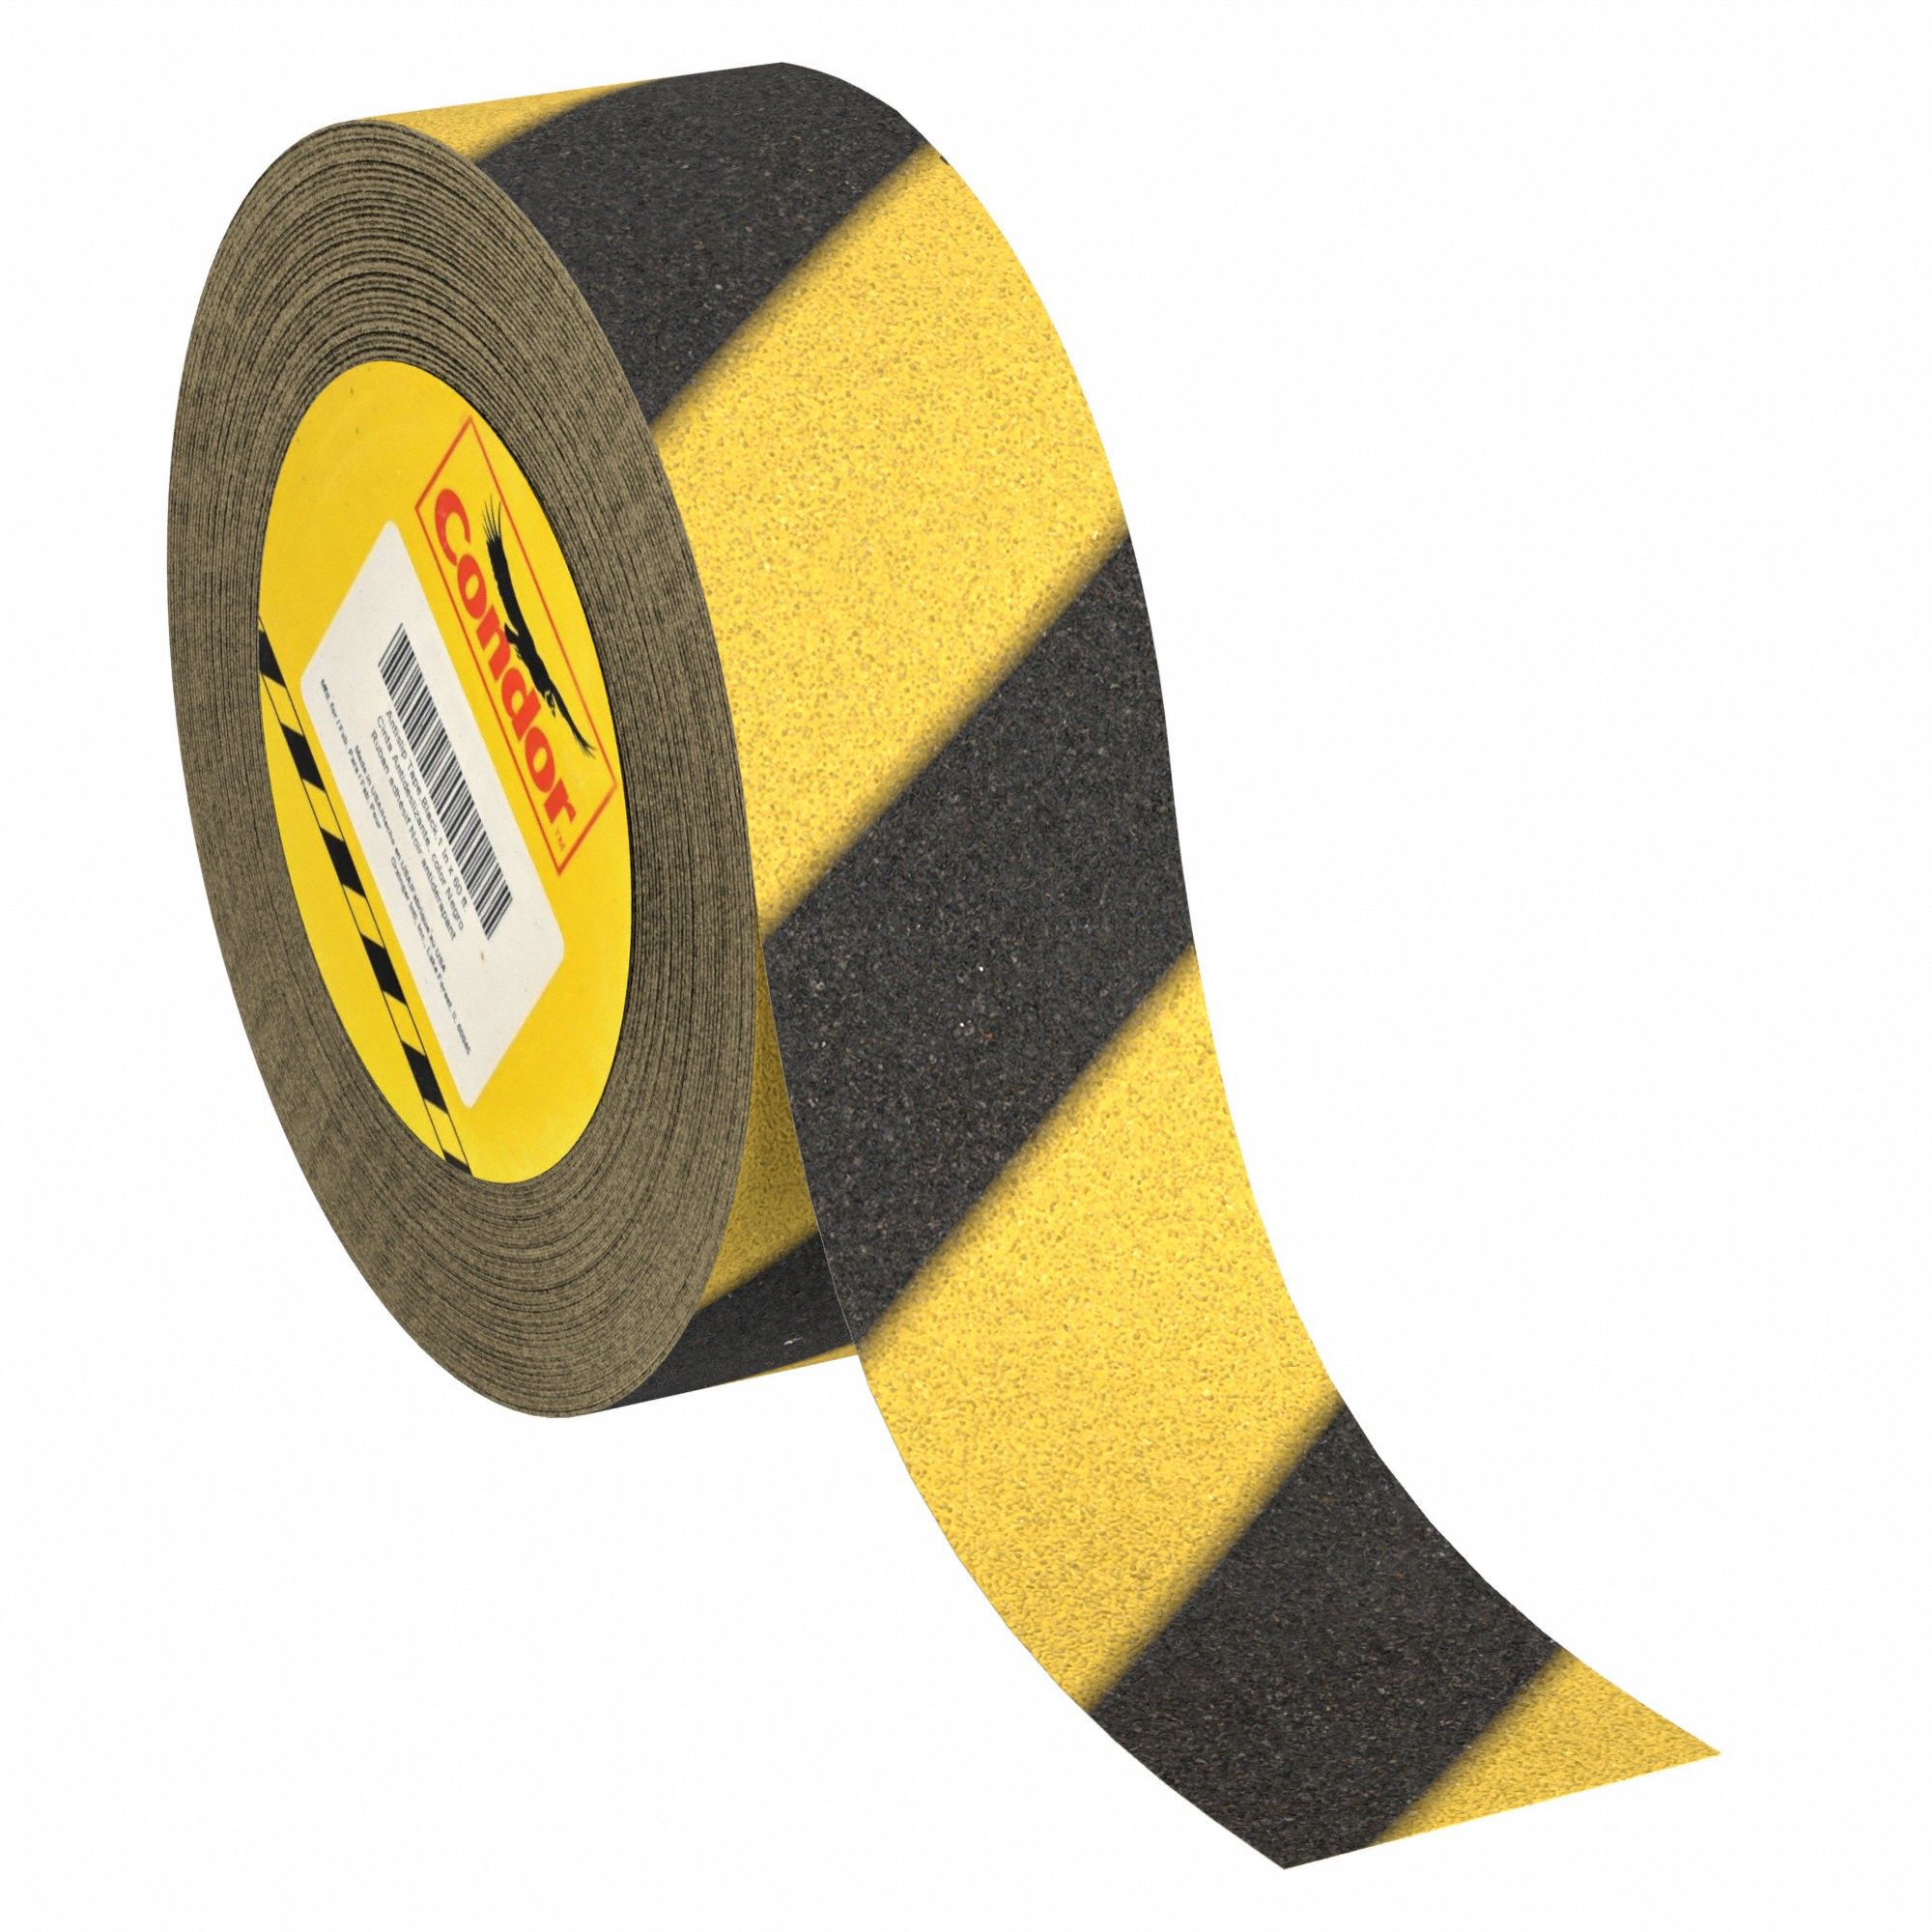 Antislip Tape: Non-Skid, Yellow Traction Tape  Industrial Rubber  Anti-Fatigue Mats, Dock Bumpers, Wheel Chocks